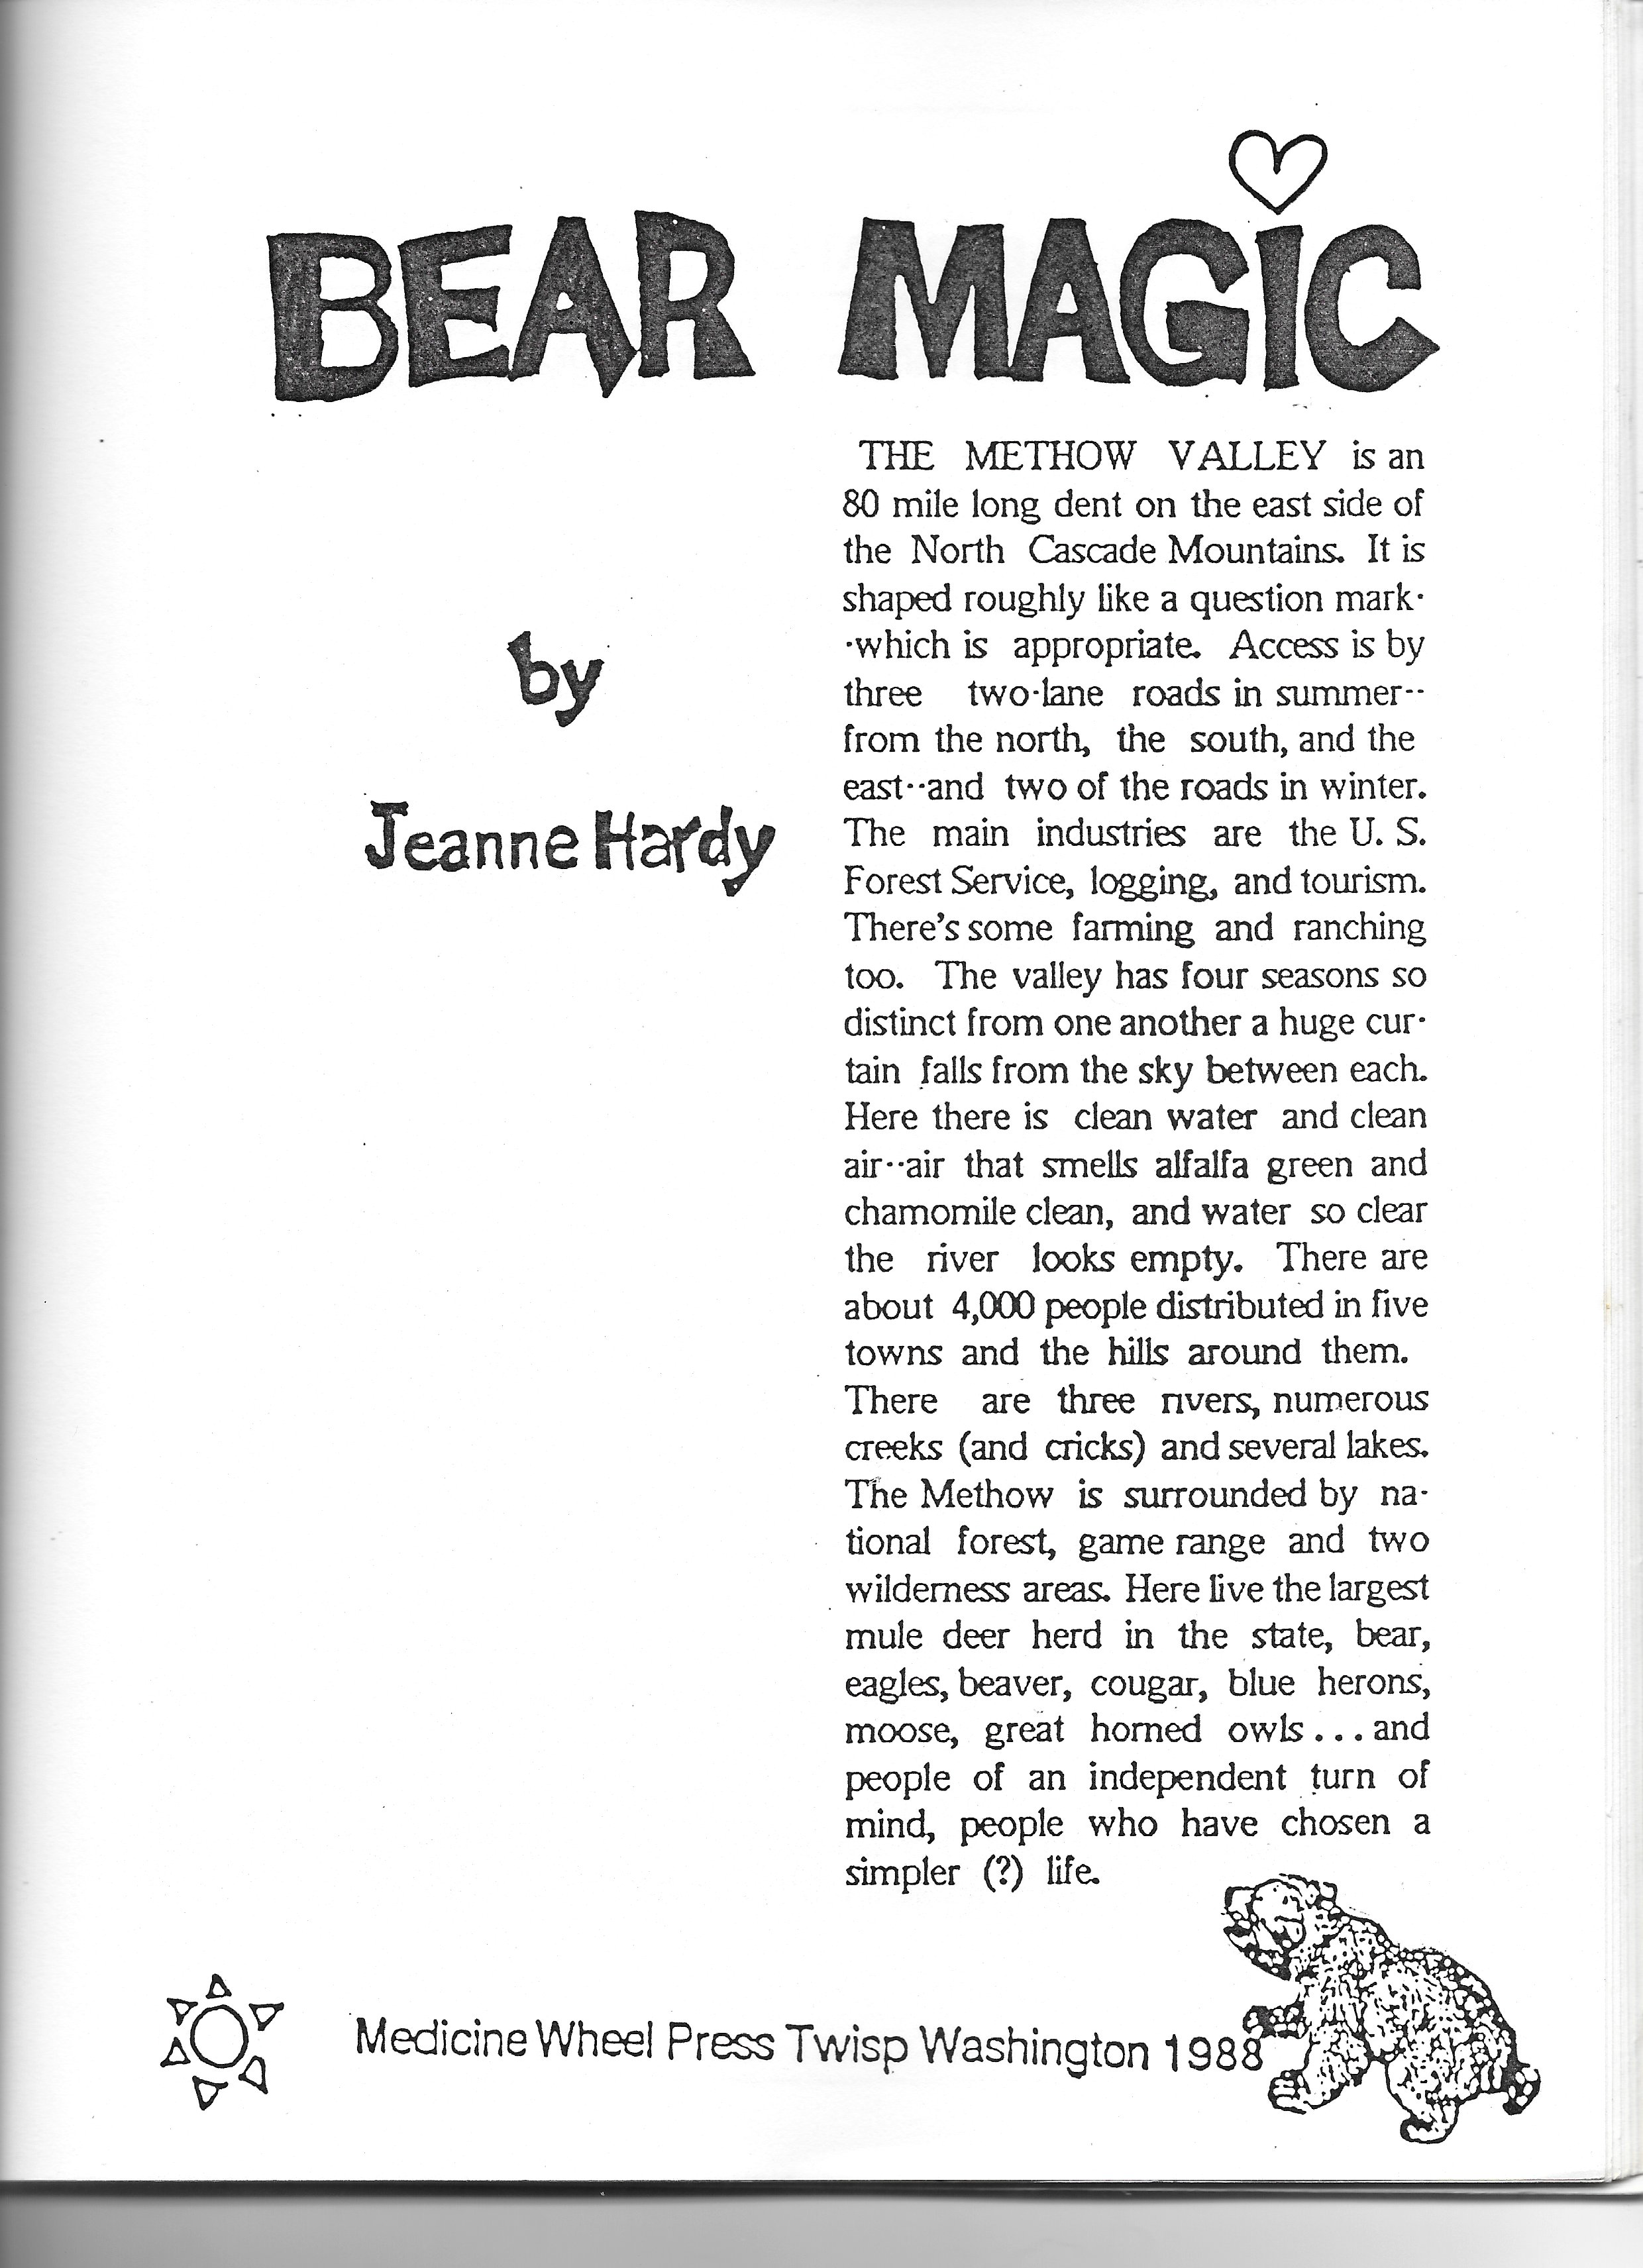 Bear Magic by Jeanne Hardy_Page_02.png